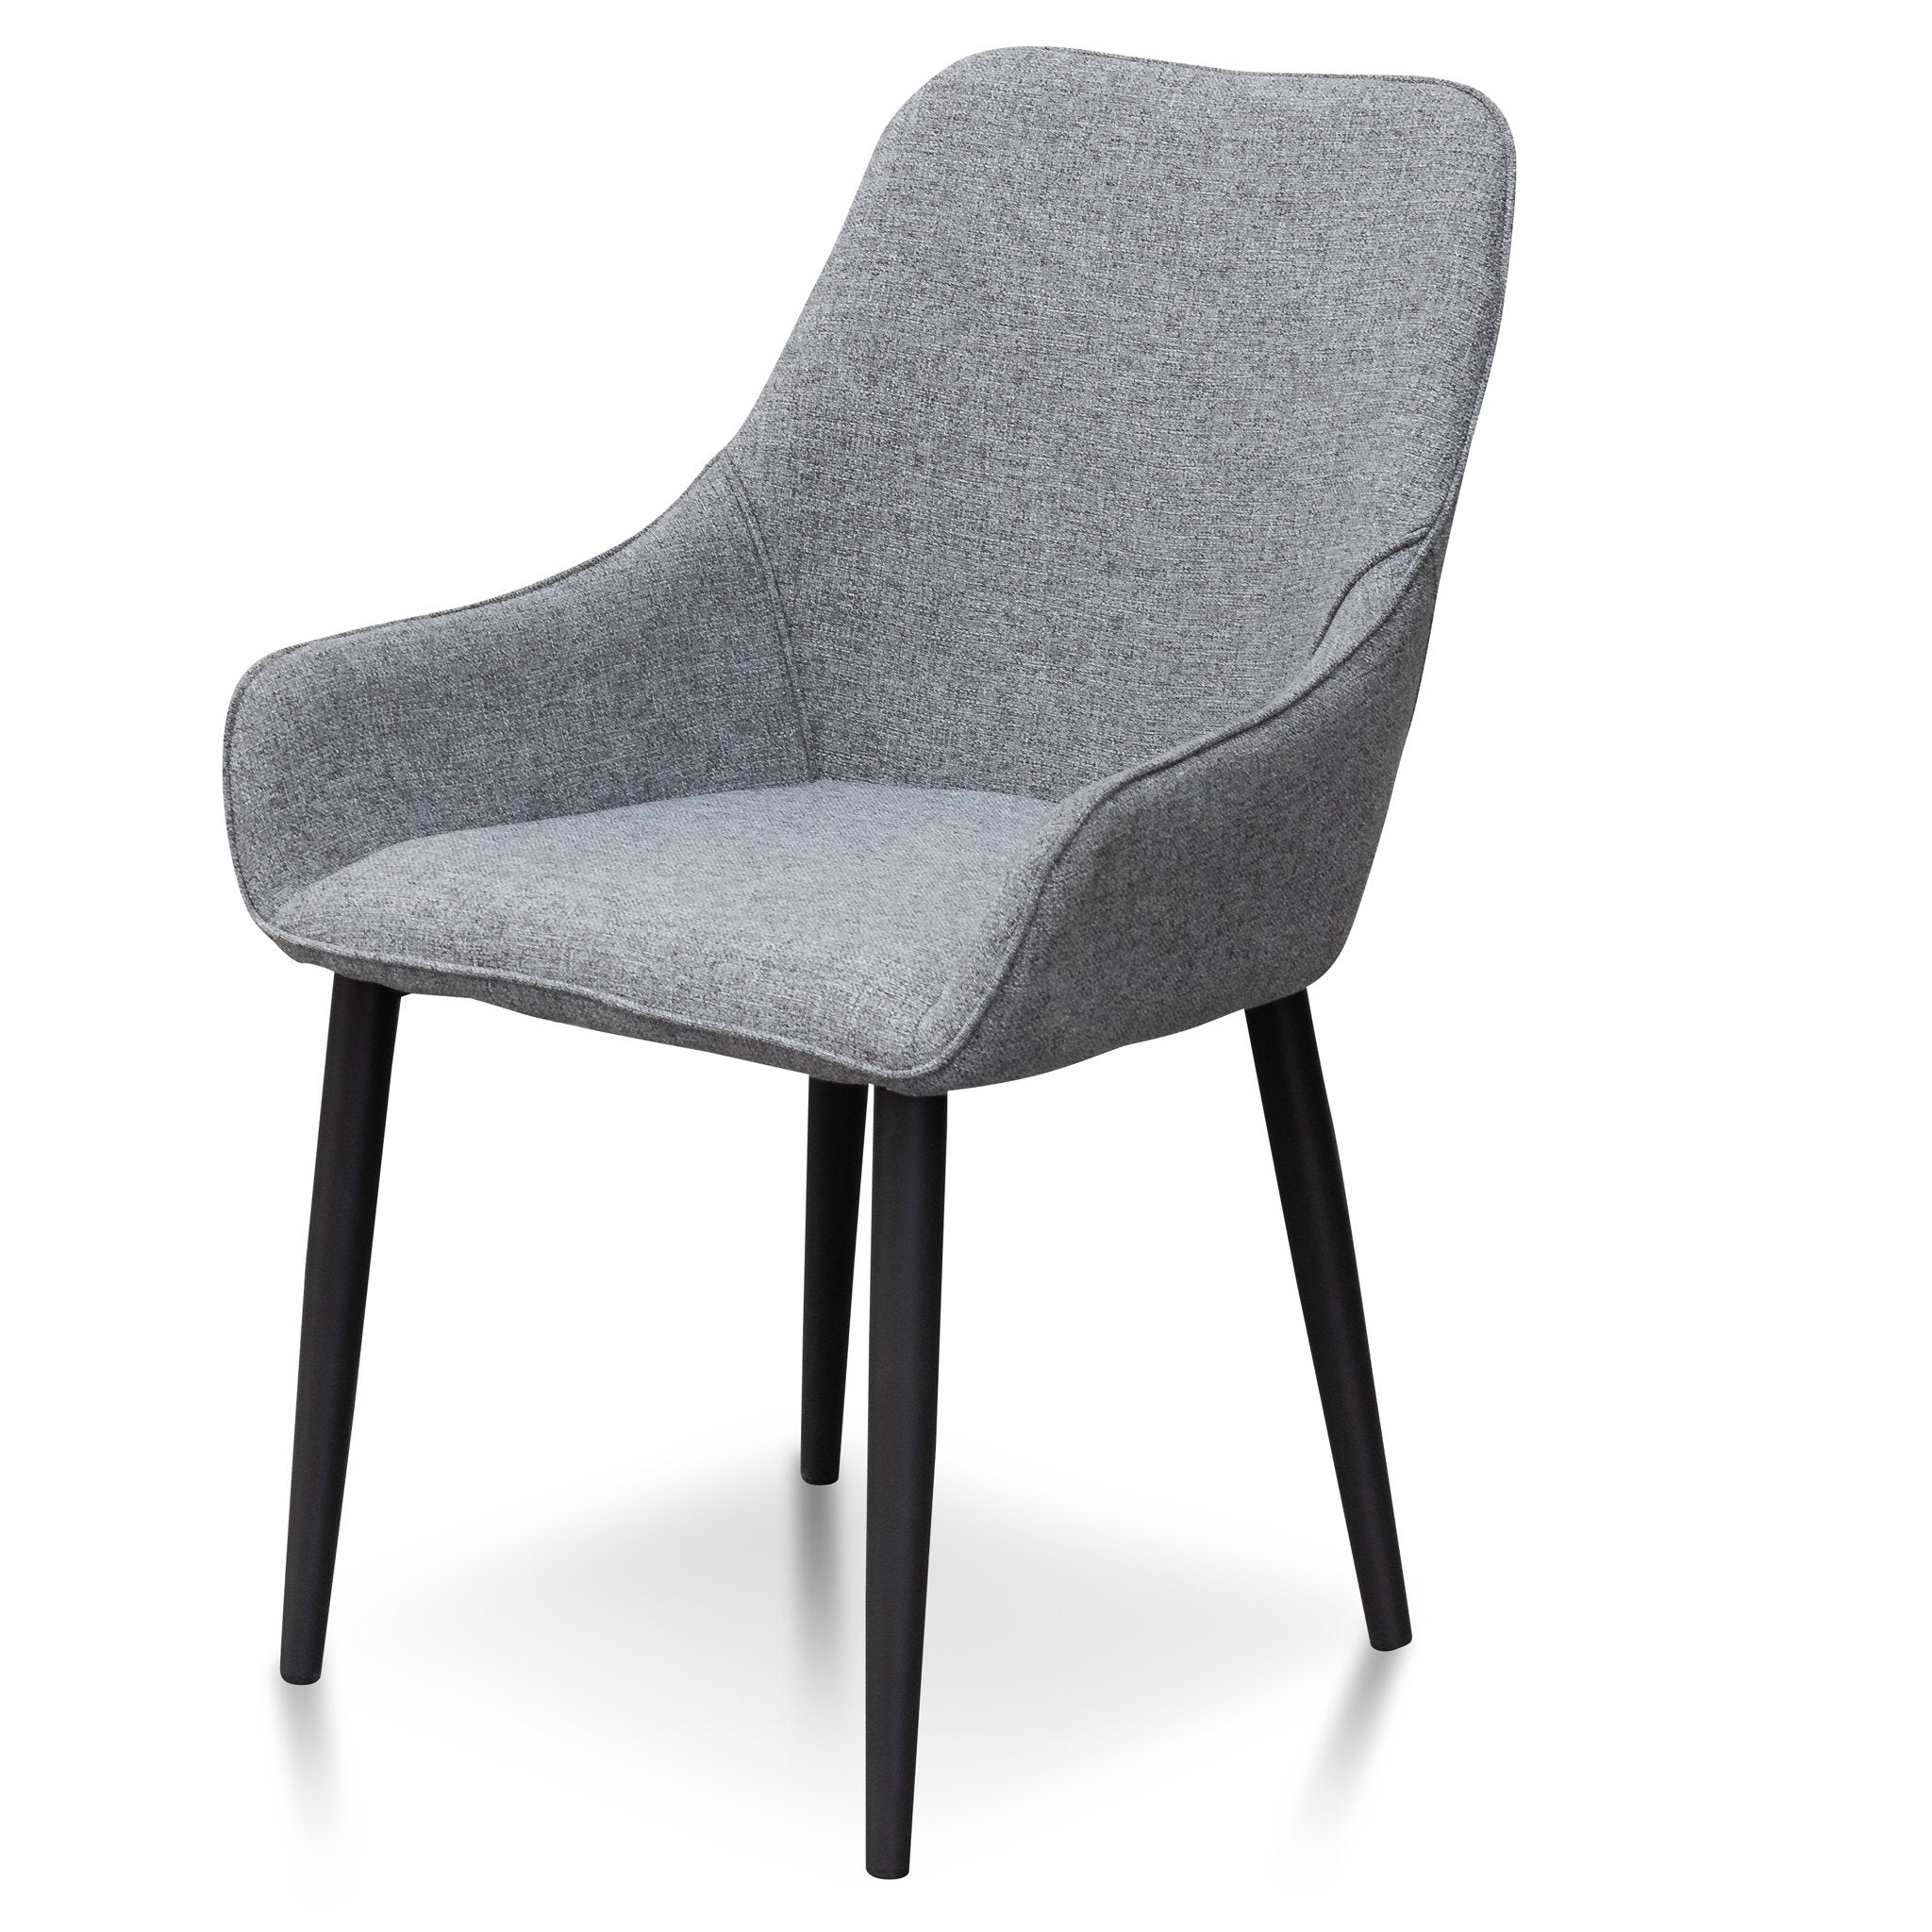 Evelyn Dining Chair - Pebble Grey Fabric with Black Legs